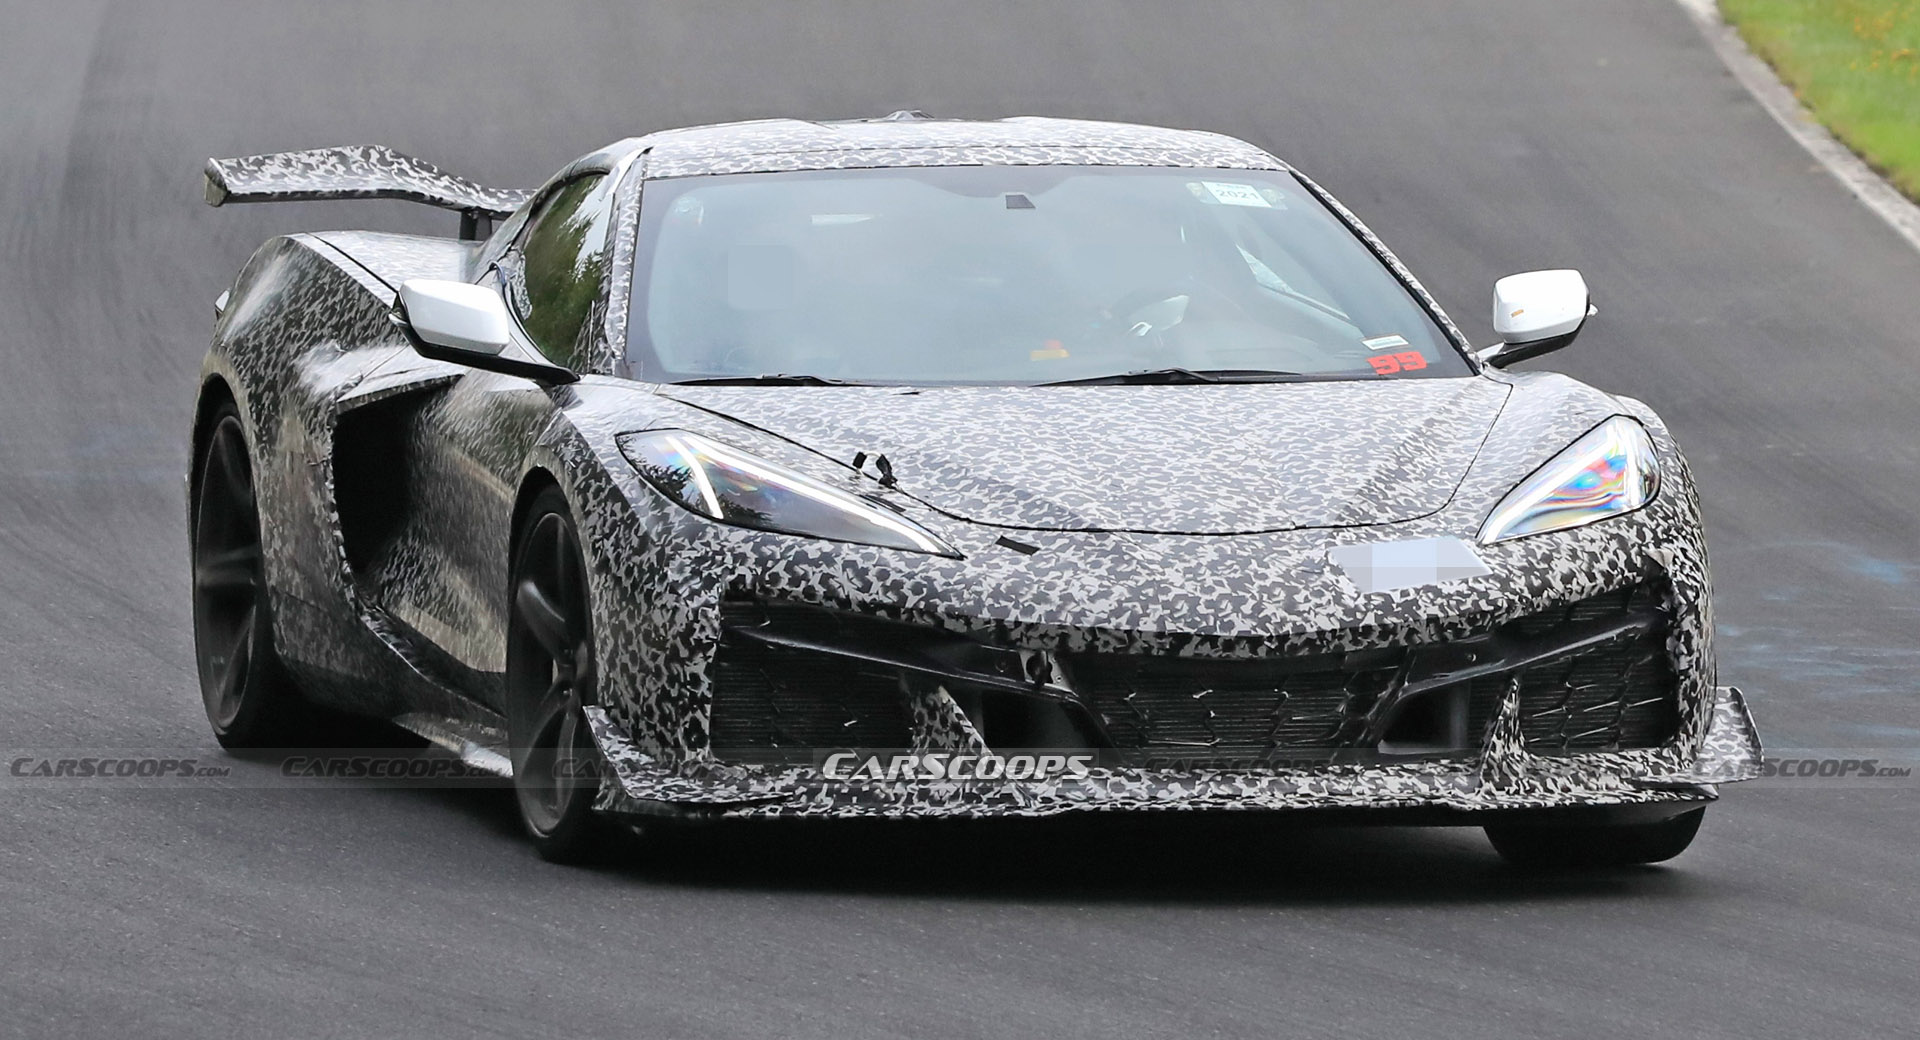 Watch The 2023 Corvette Z06 Debut Here Live At 12pm EST